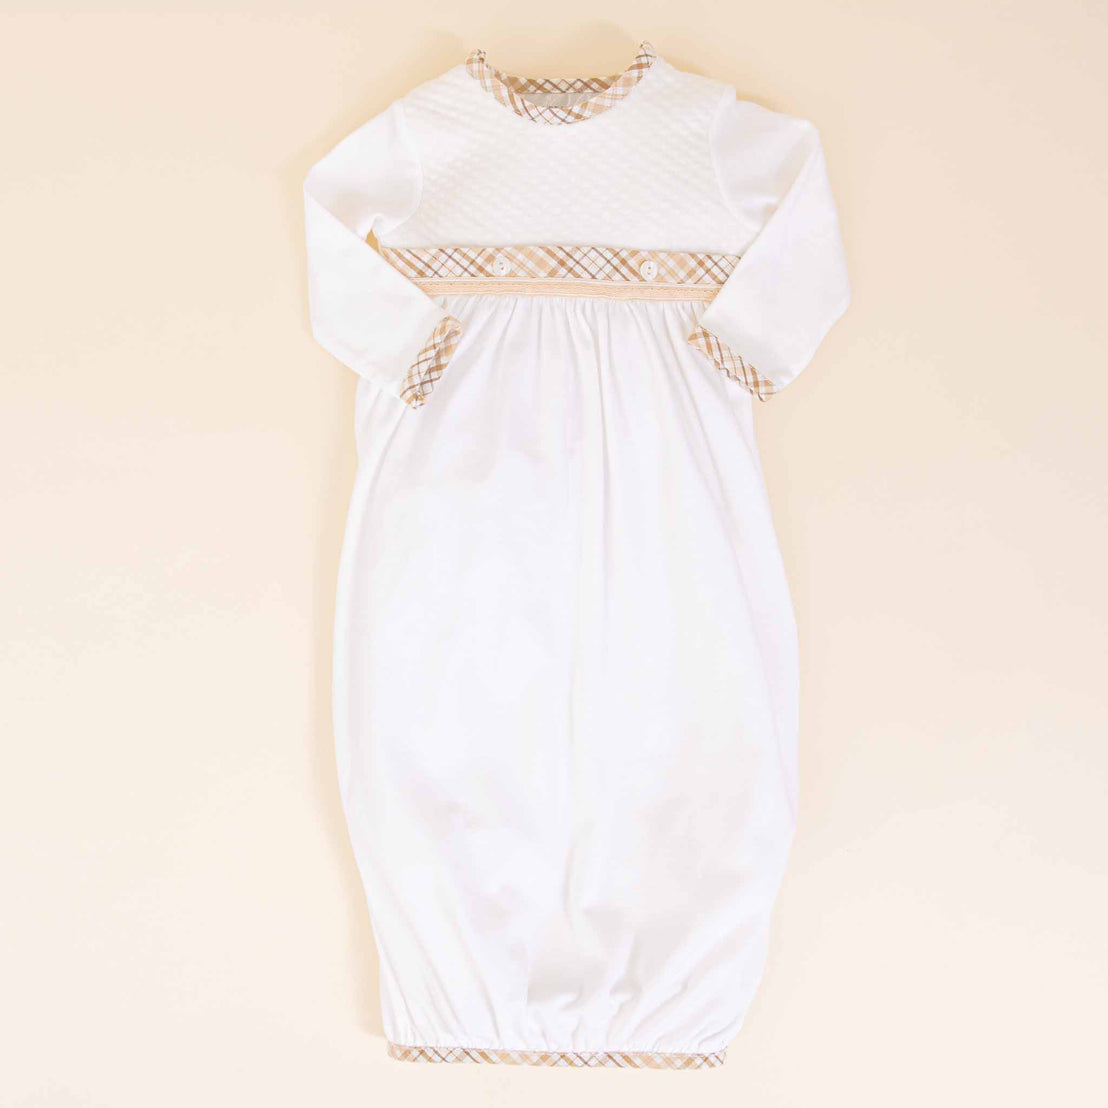 A white Dylan Layette with detailed golden embroidery across the chest and sleeves, laid flat on a soft beige background, perfect as a coming home outfit.